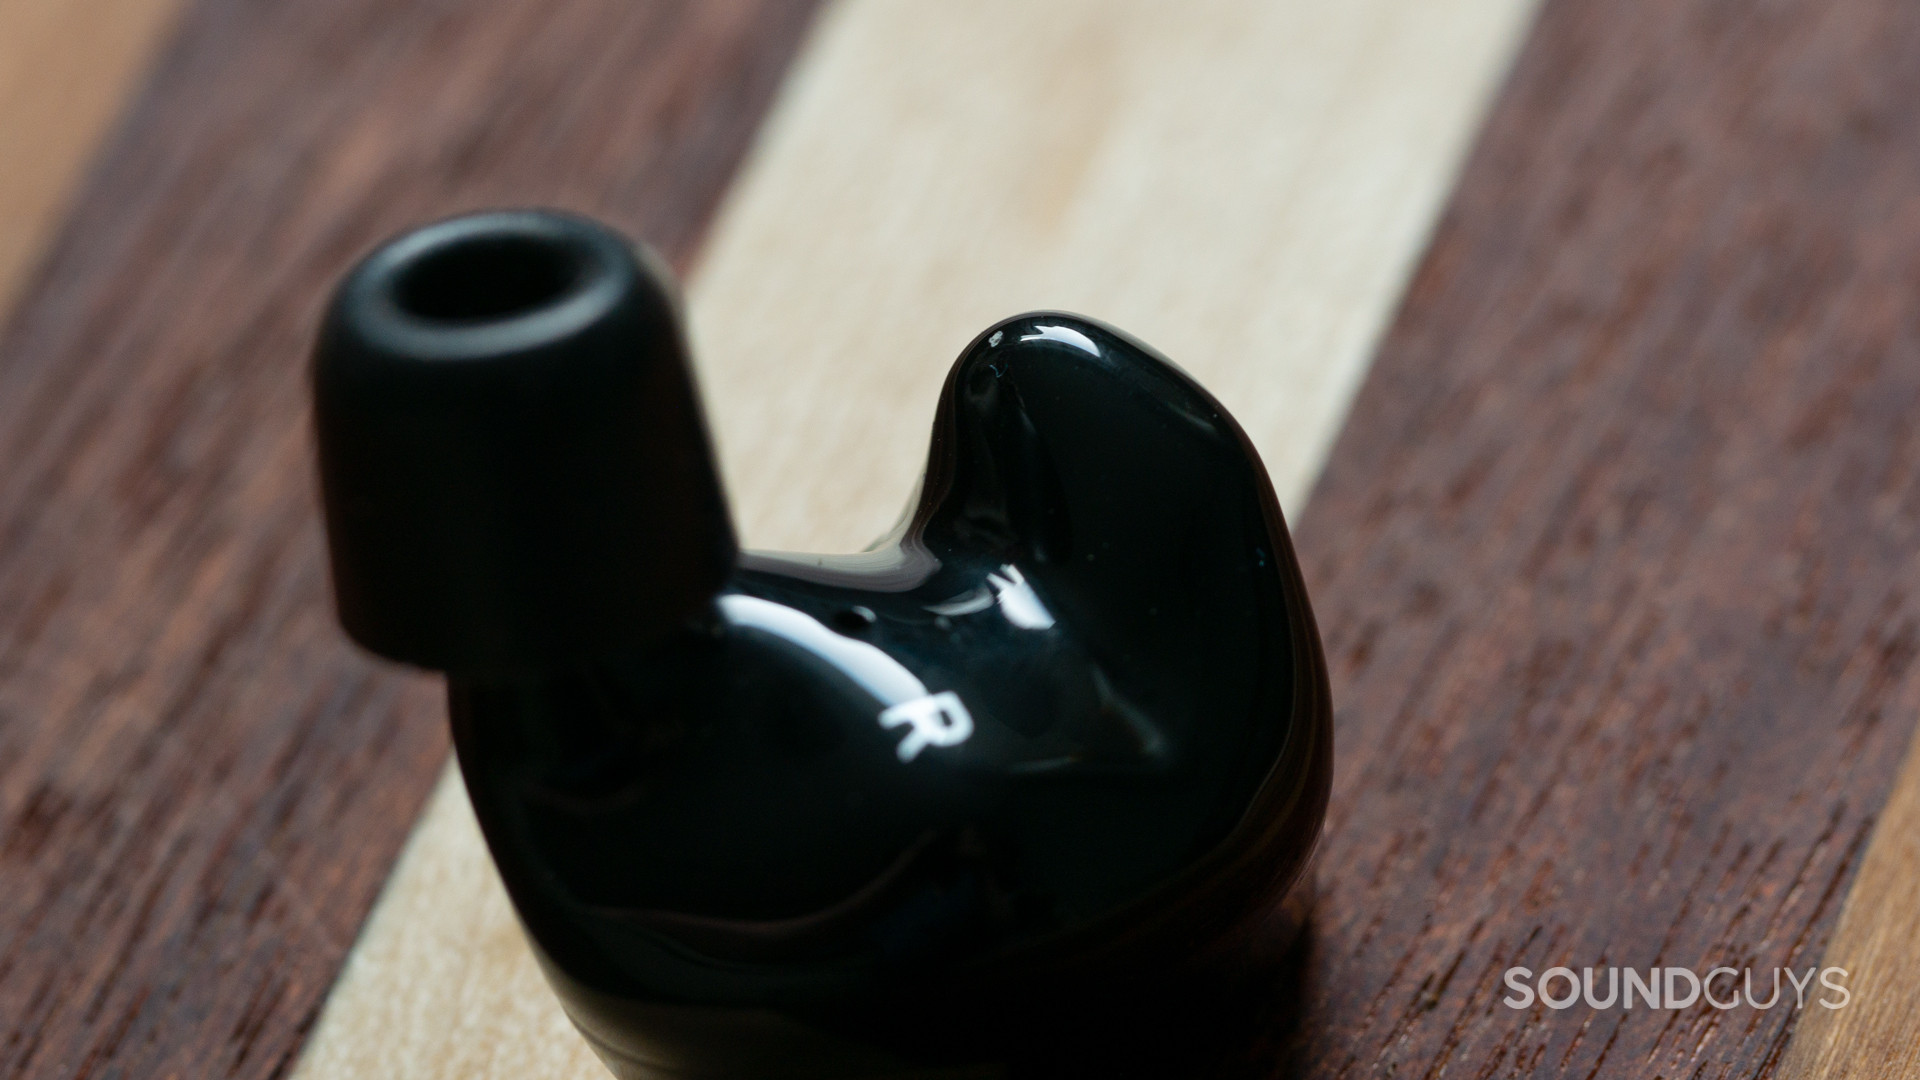 The earbuds of the Razer Moray are shaped to fit inside ears.